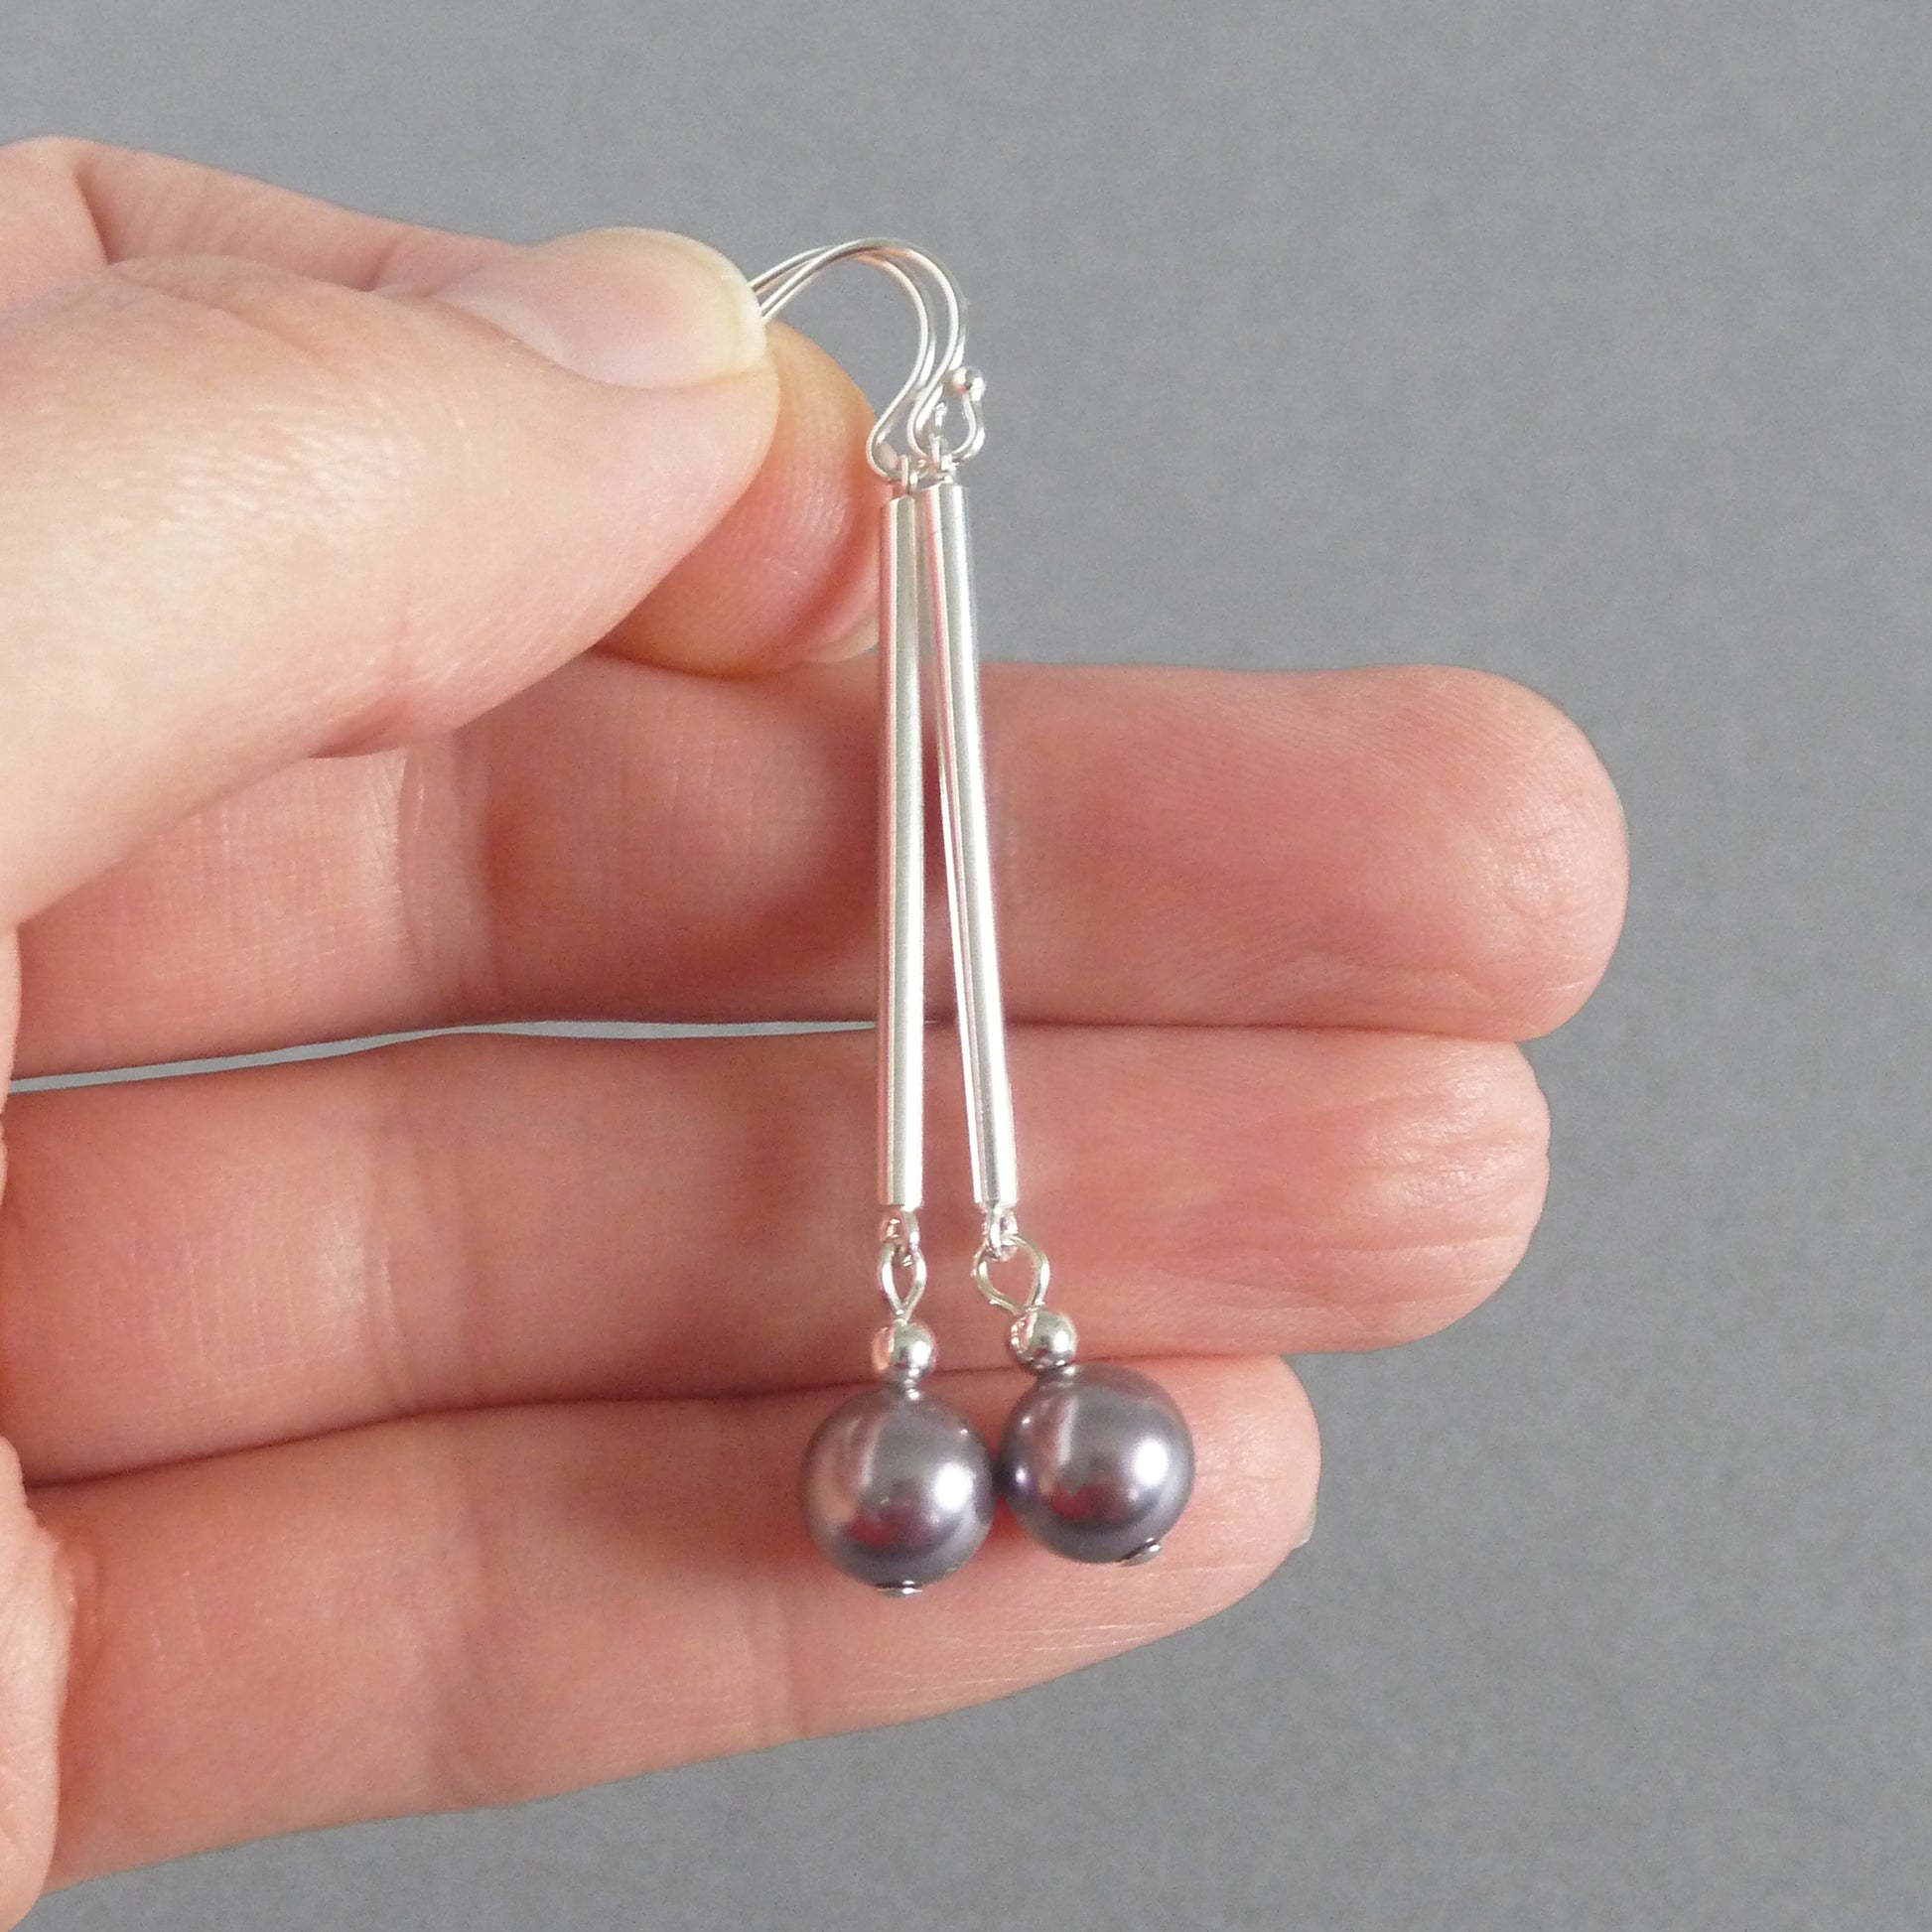 Long lilac pearl earrings with Sterling silver hooks